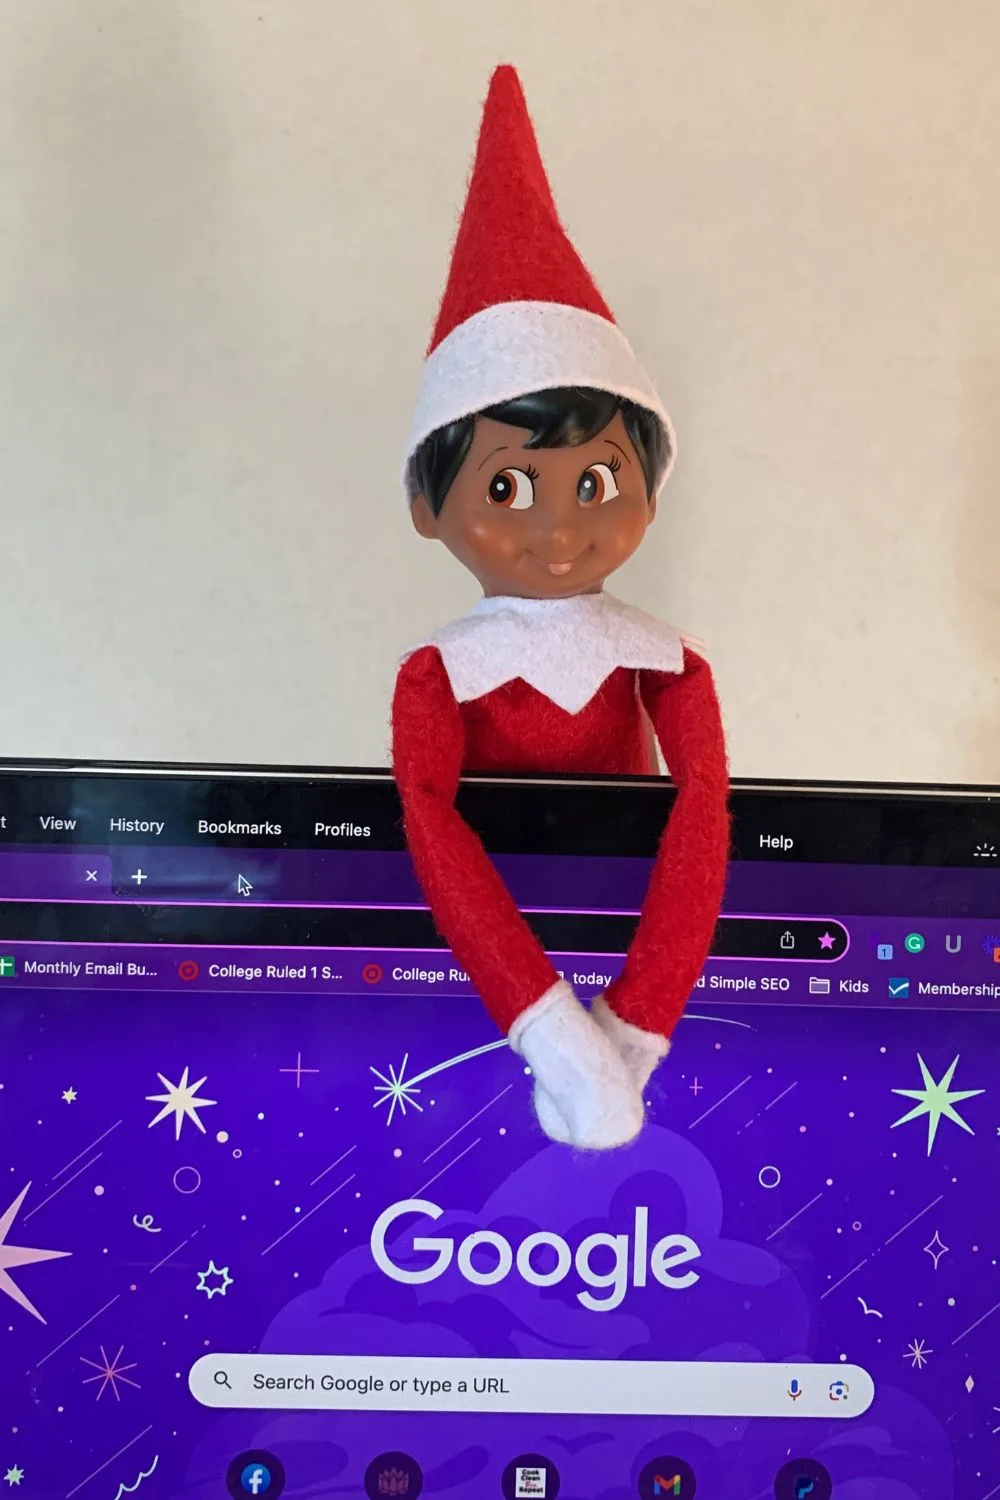 What Is Elf on the Shelf and How Does It Work?